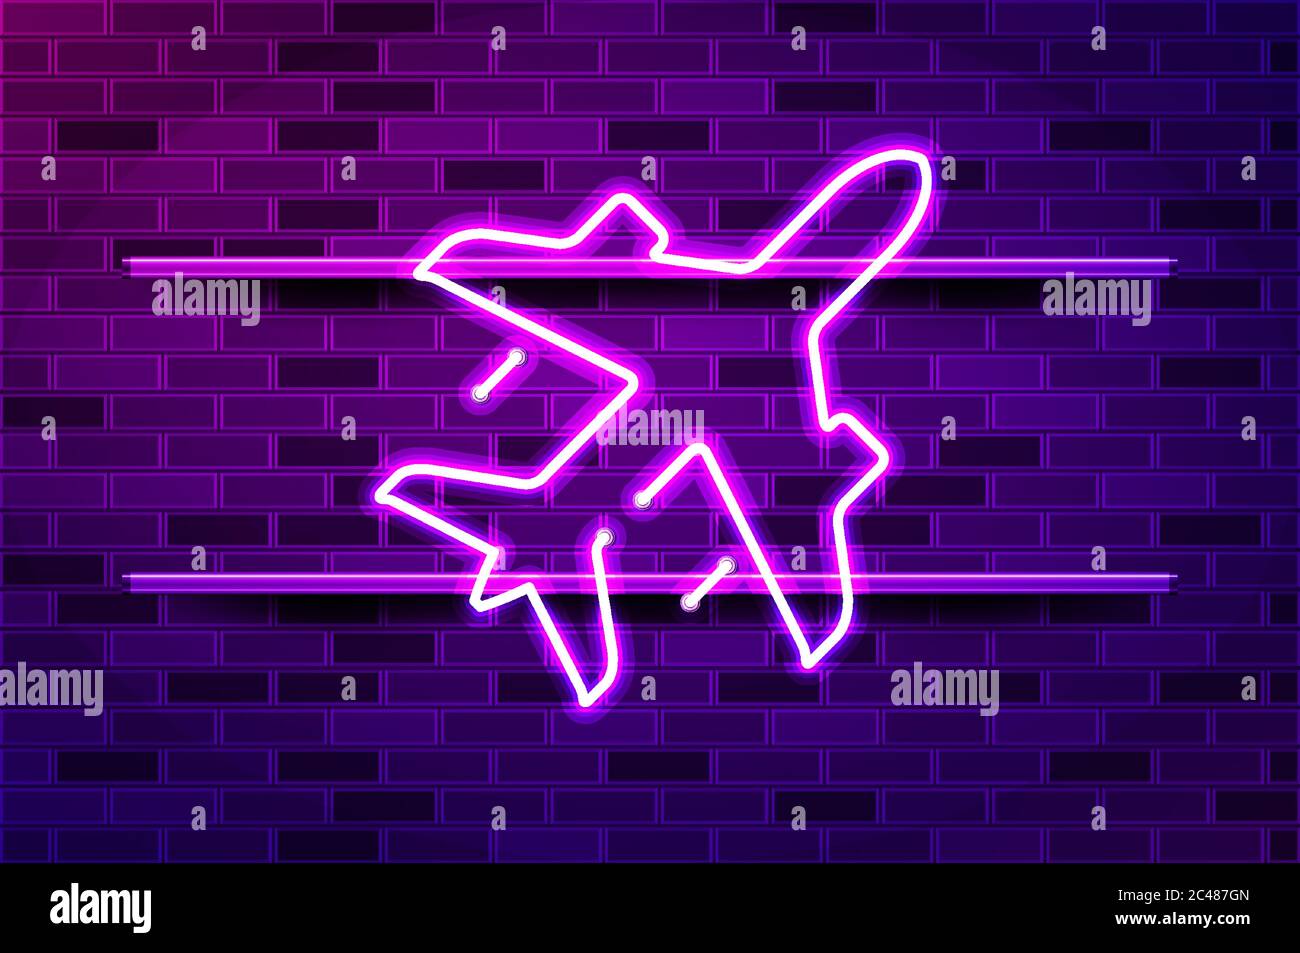 Plane glowing neon sign or LED strip light. Realistic vector illustration. Purple brick wall, violet glow, metal holders. Stock Vector